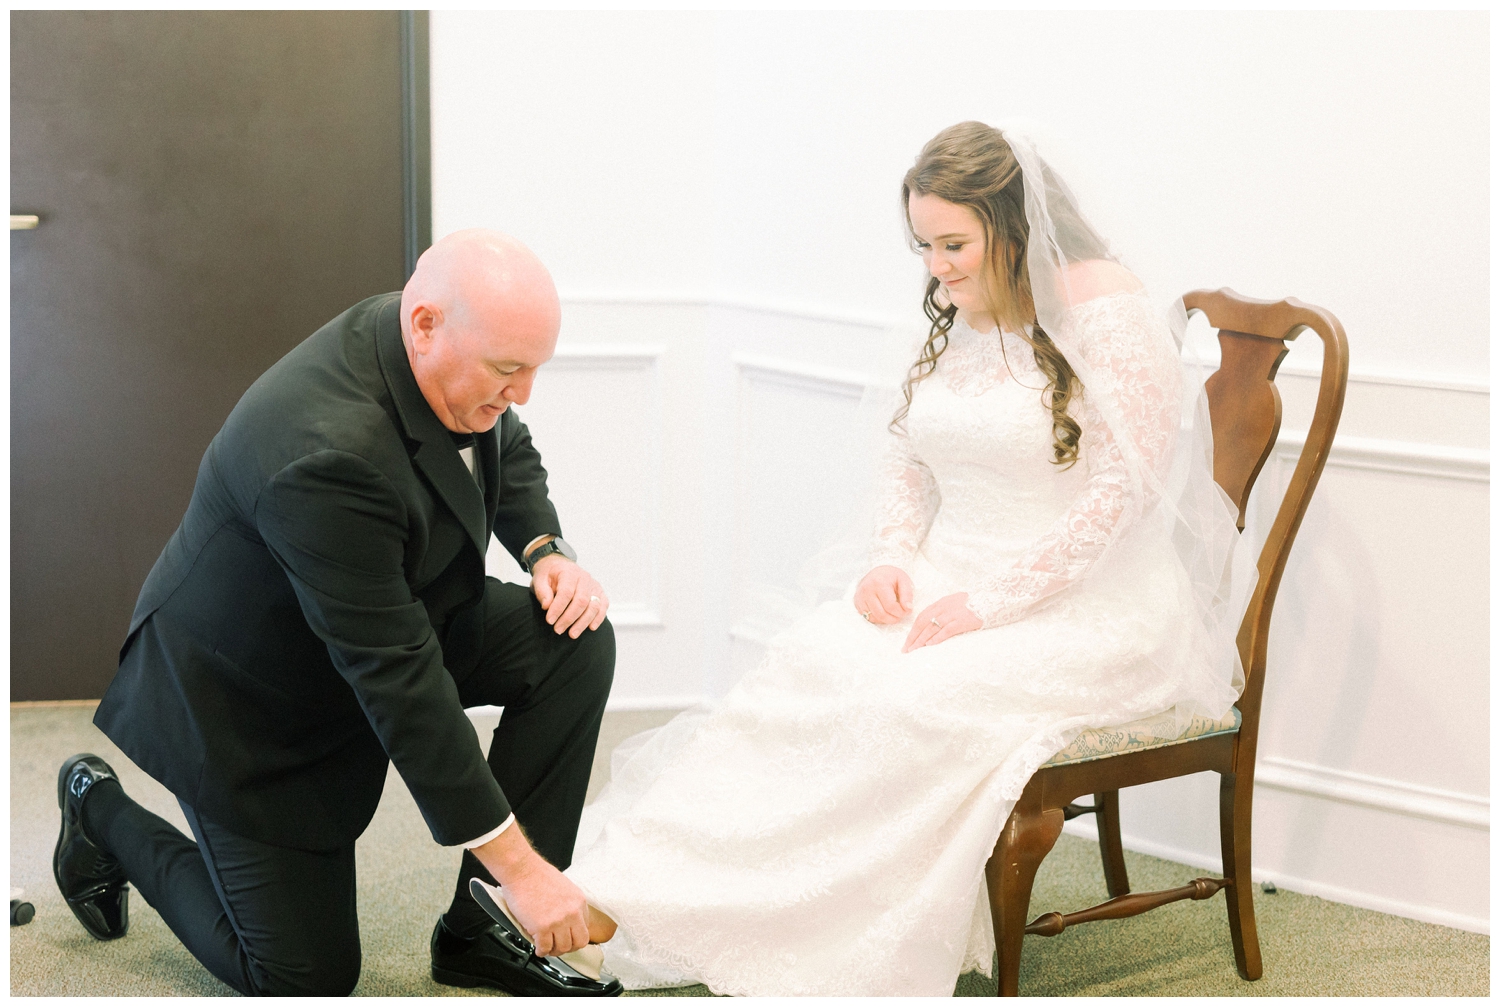 father putting penny inside bride's shoe